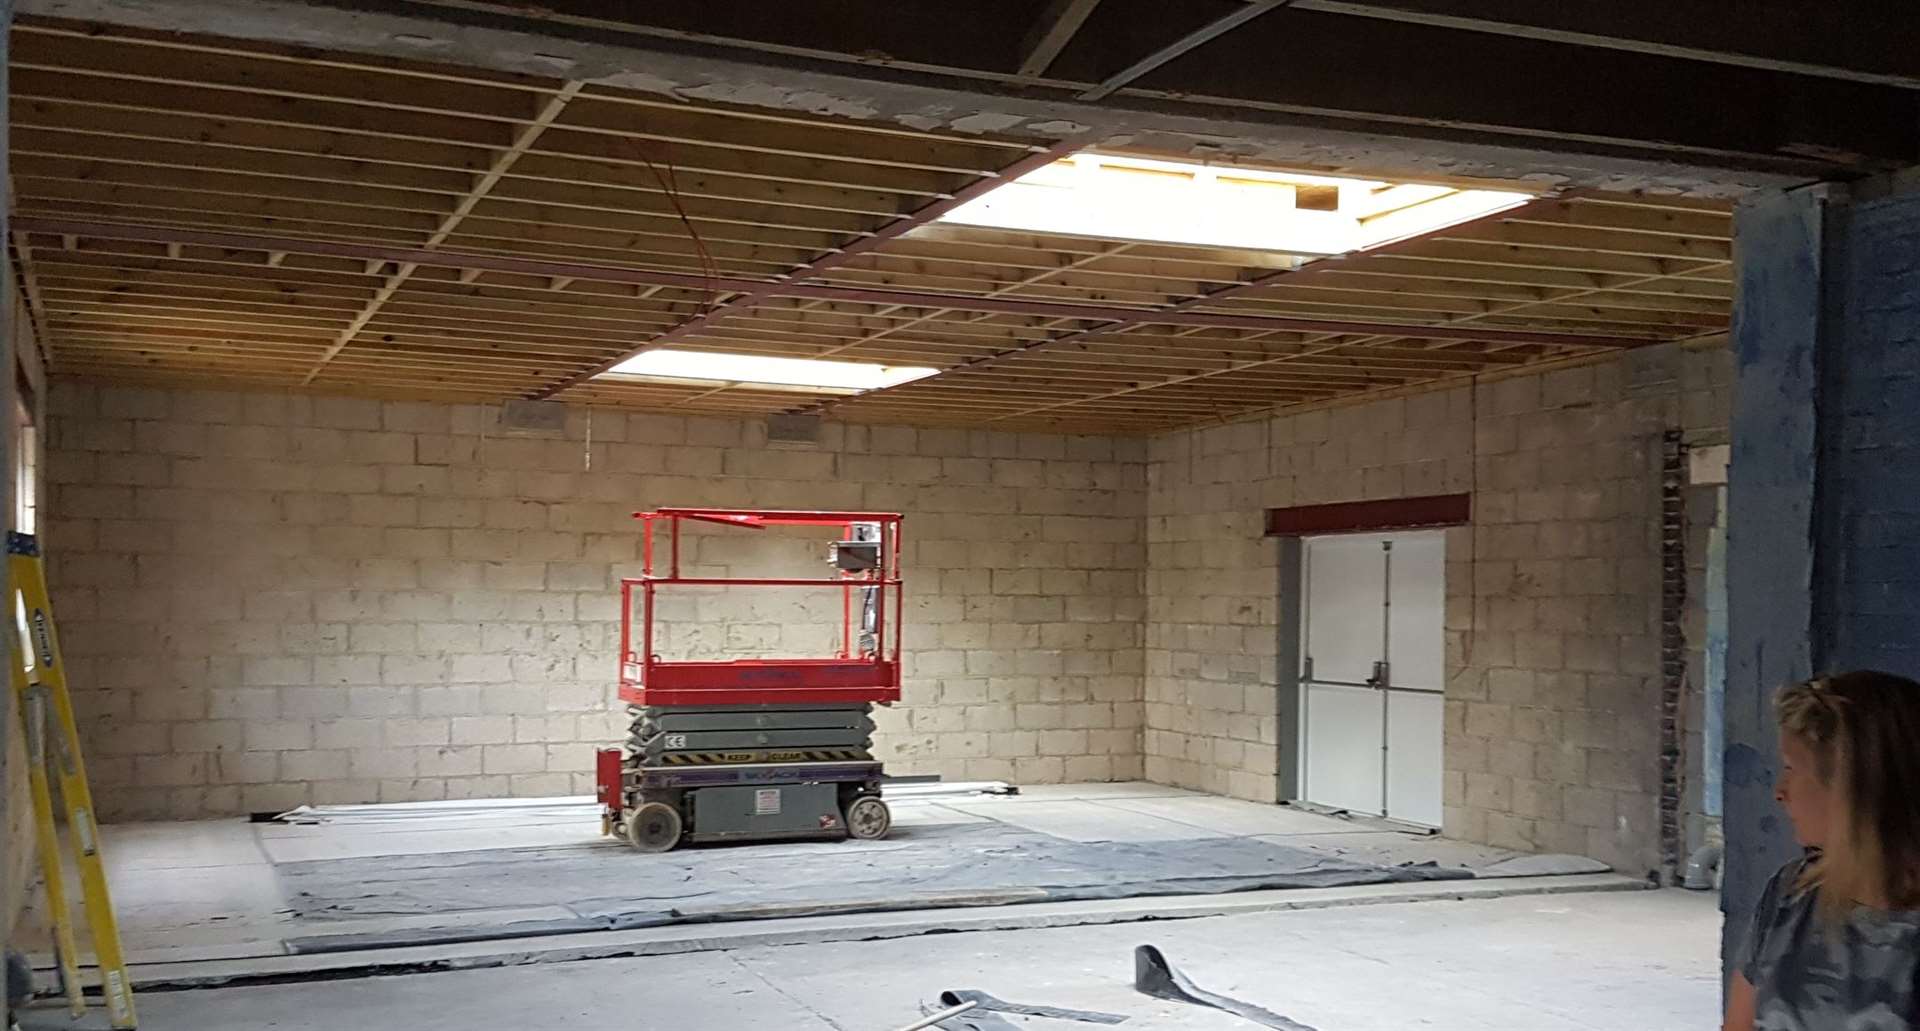 Europa Gym in Temple Hill, Darford during the refurbishment